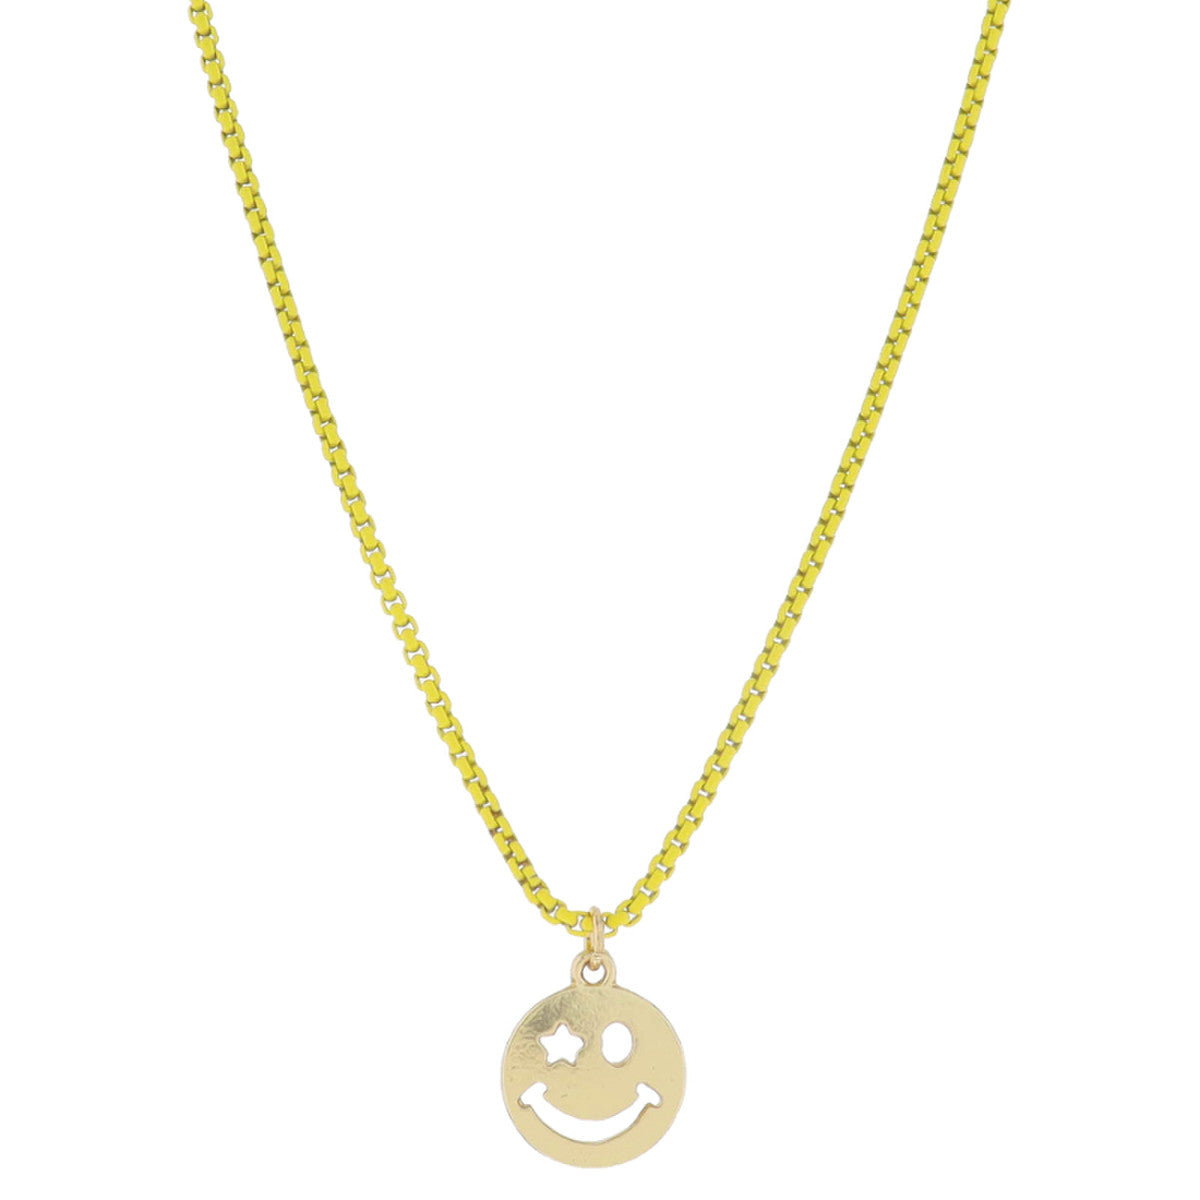 Kids Happy Face Necklace - Yellow